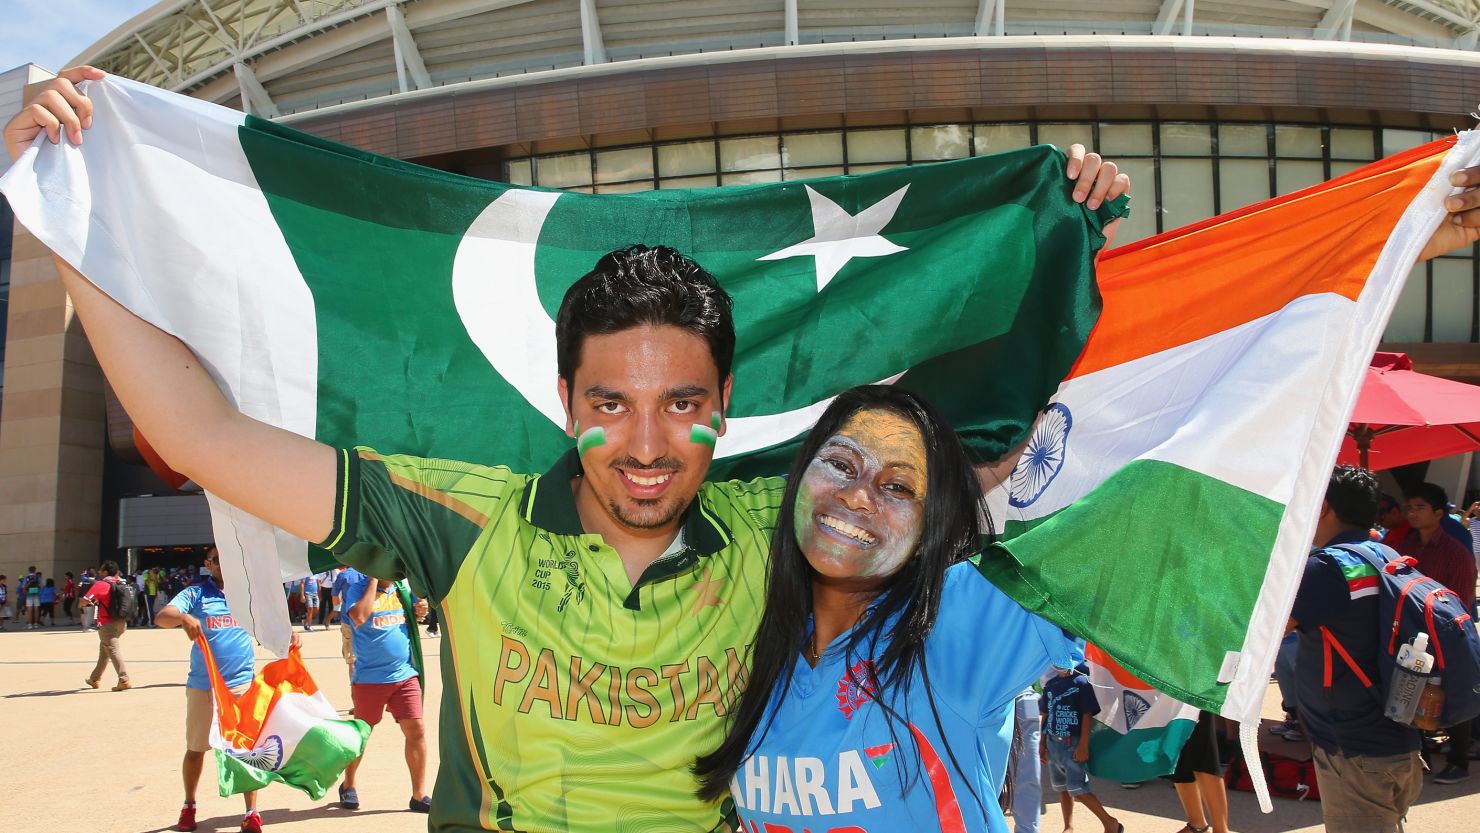 Pakistan and India cricket supporters pose with their flags outside of the Adelaide Oval.